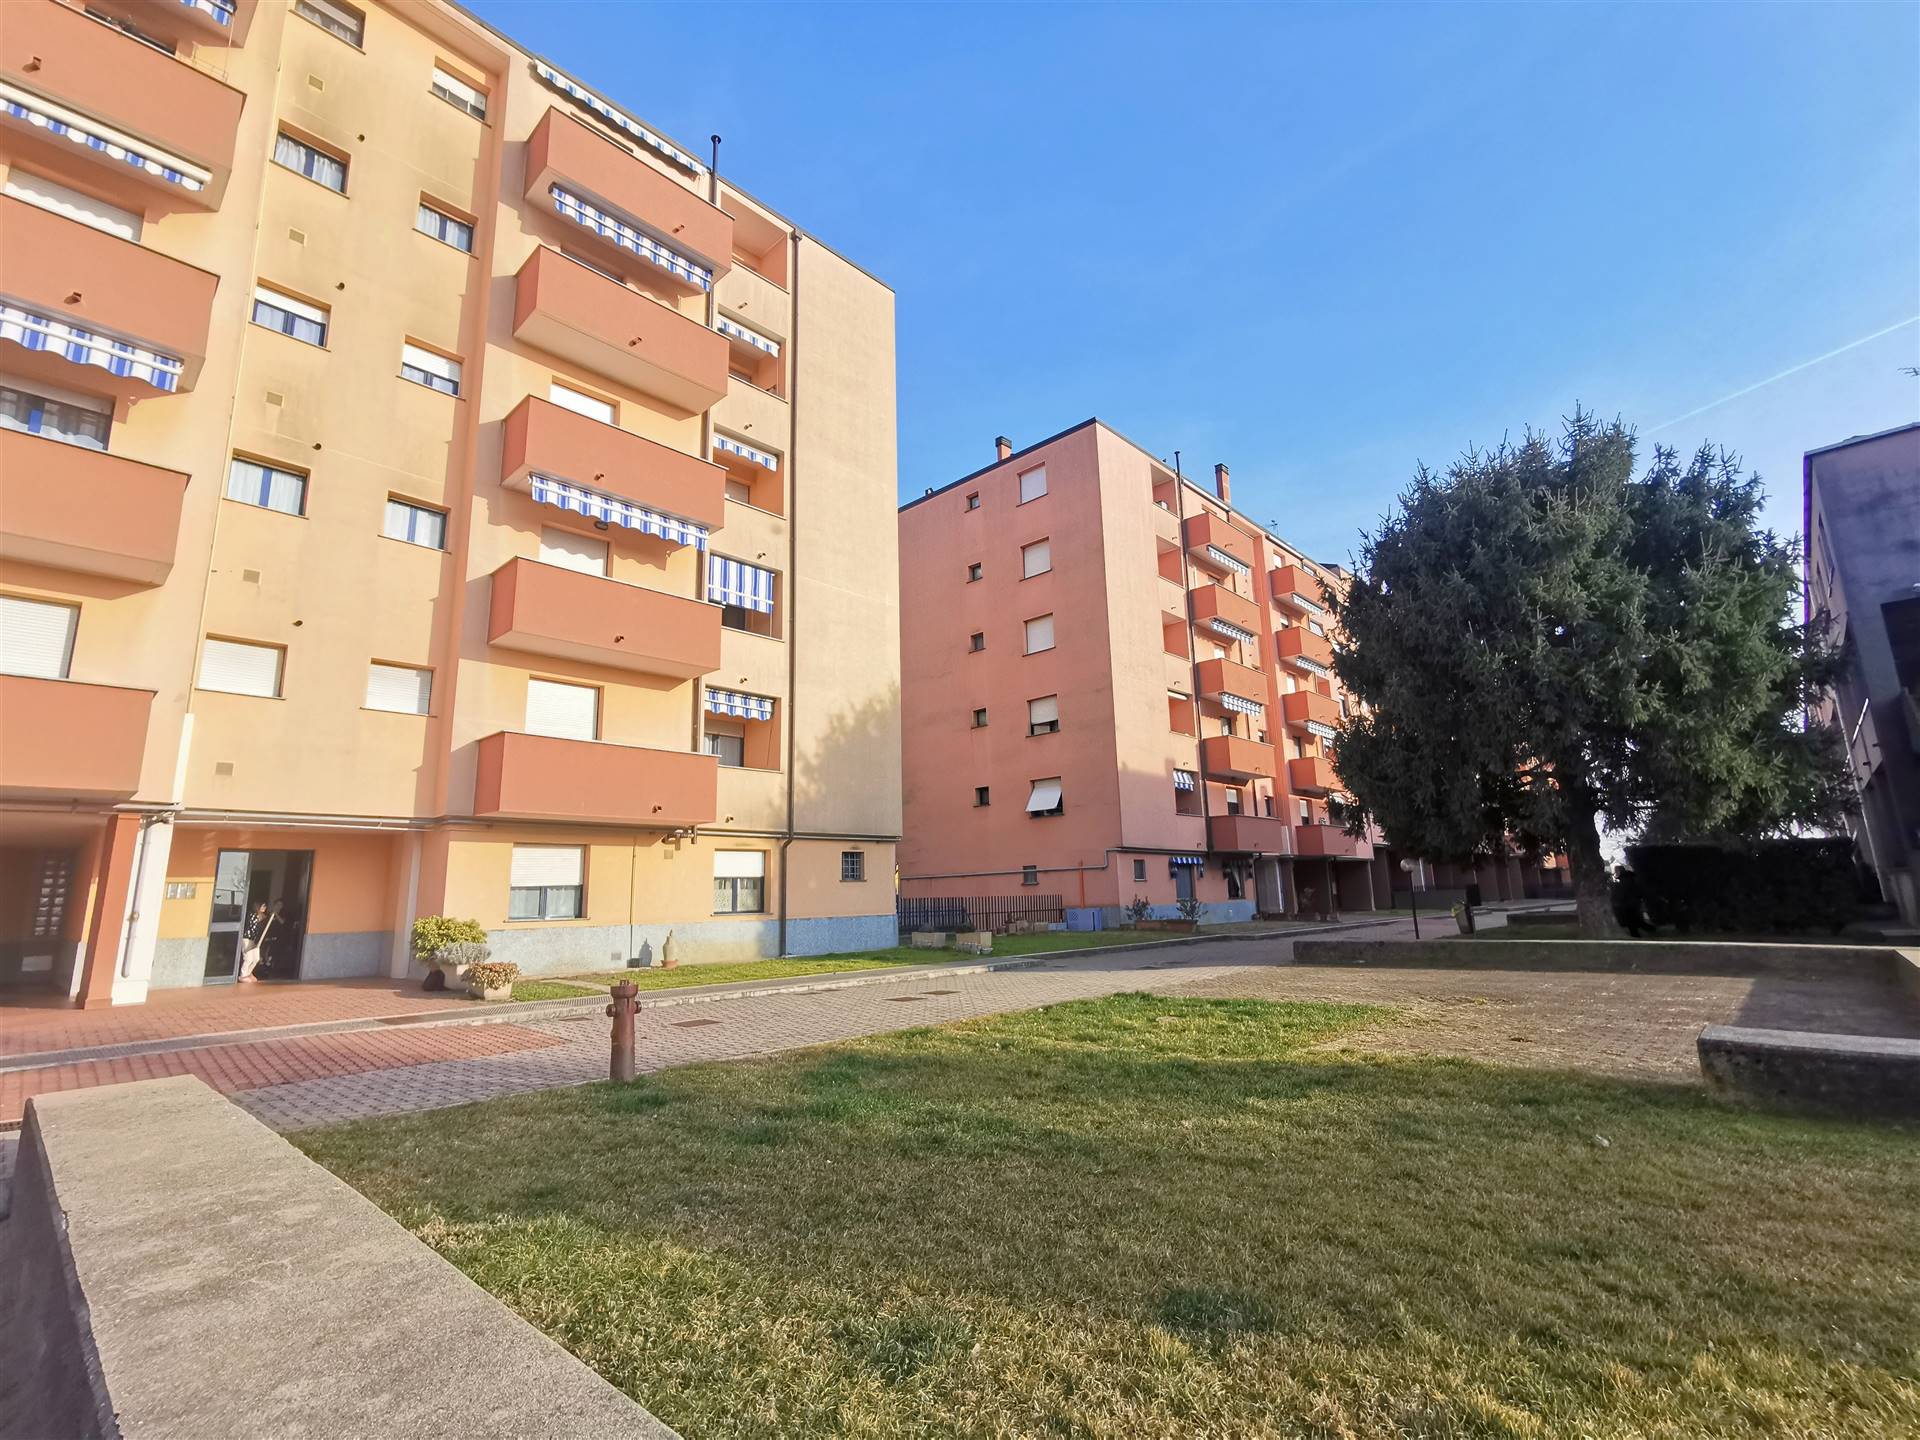 MUGGIO', Apartment for sale of 90 Sq. mt., Habitable, Heating Individual heating system, Energetic class: B, placed at 2° on 5, composed by: 3 Rooms, 